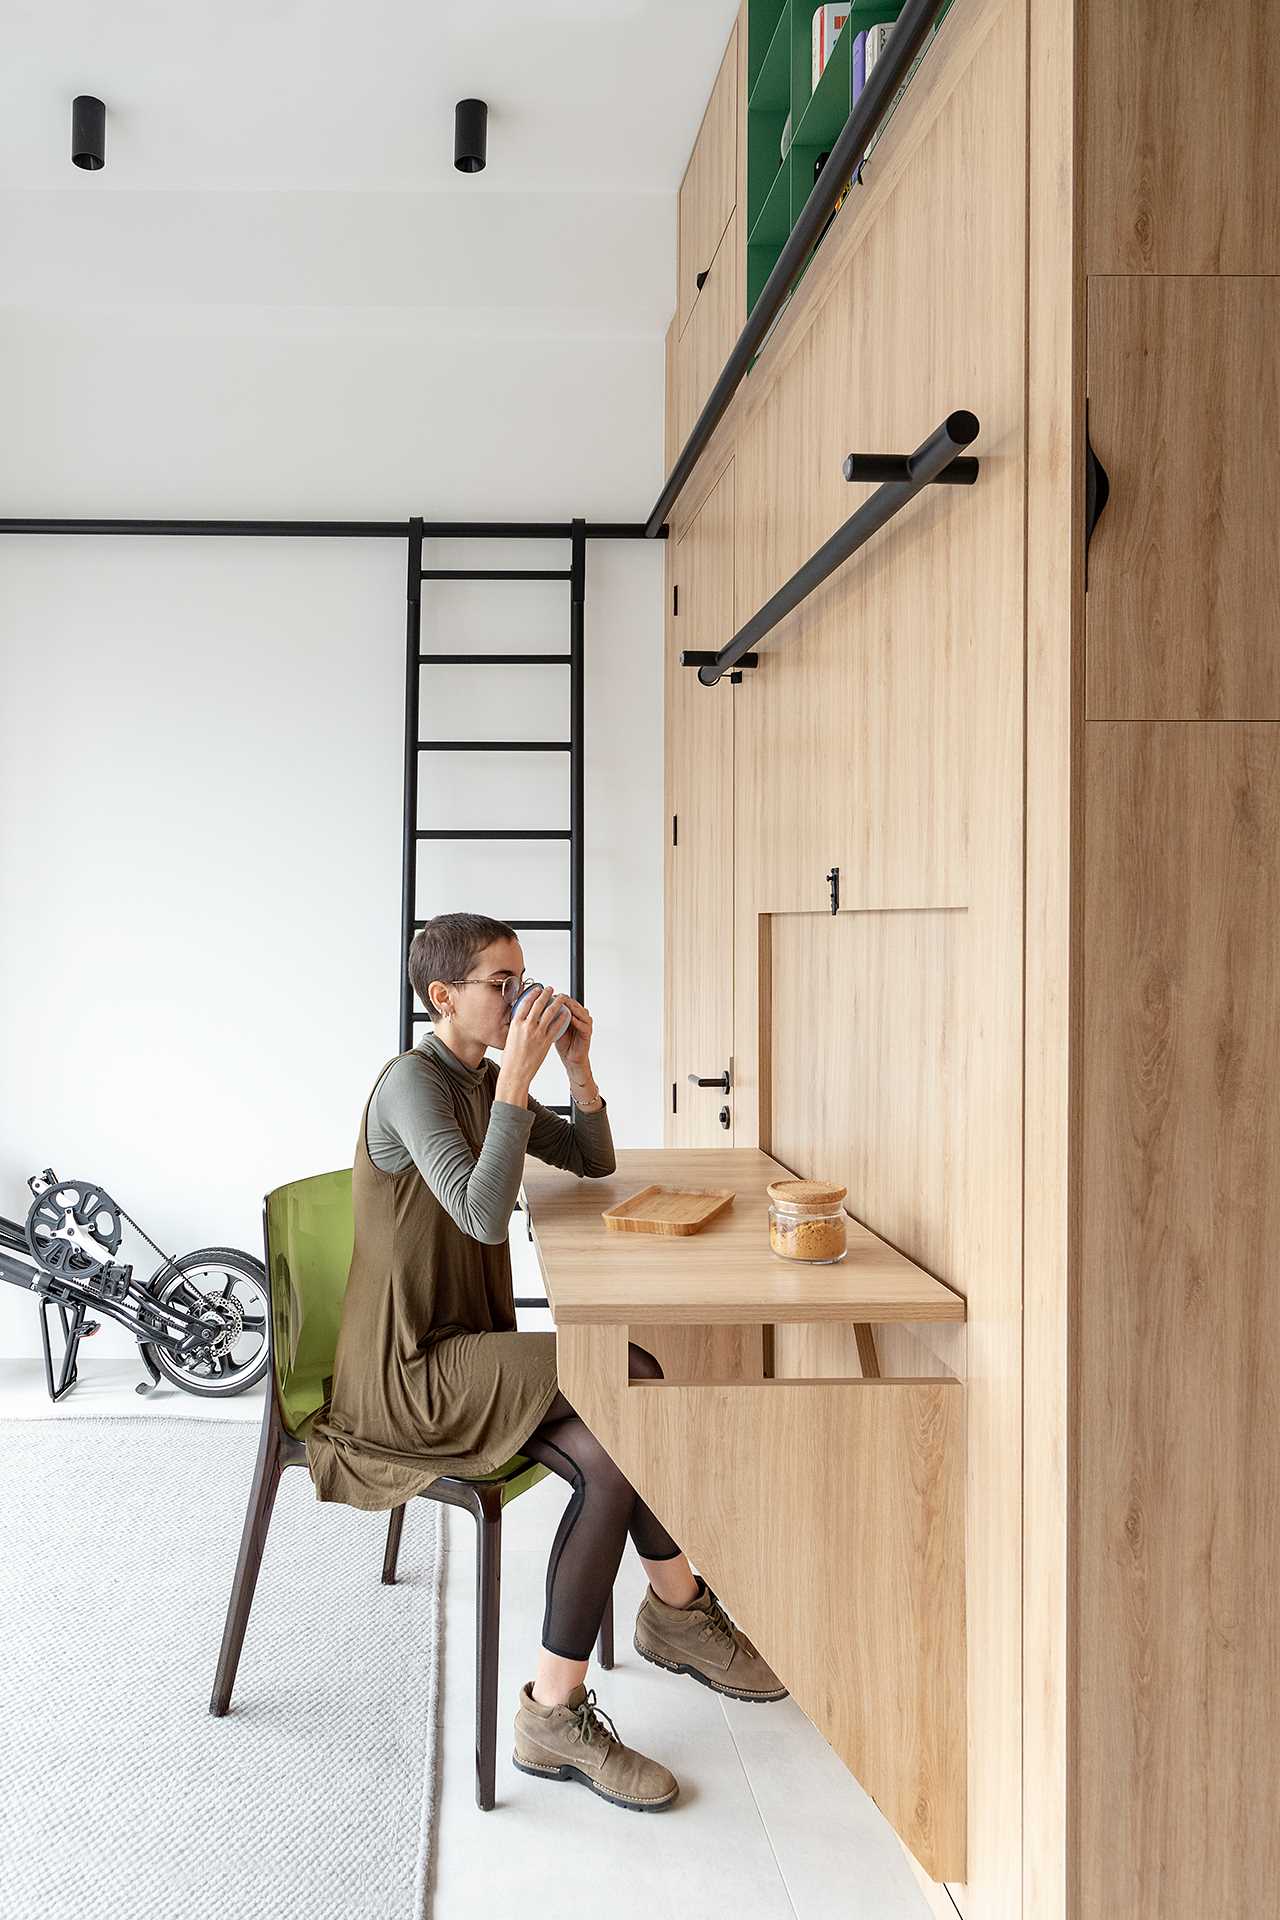 A small studio apartment with a built-in desk that can be folded down or locked in place when not in use.